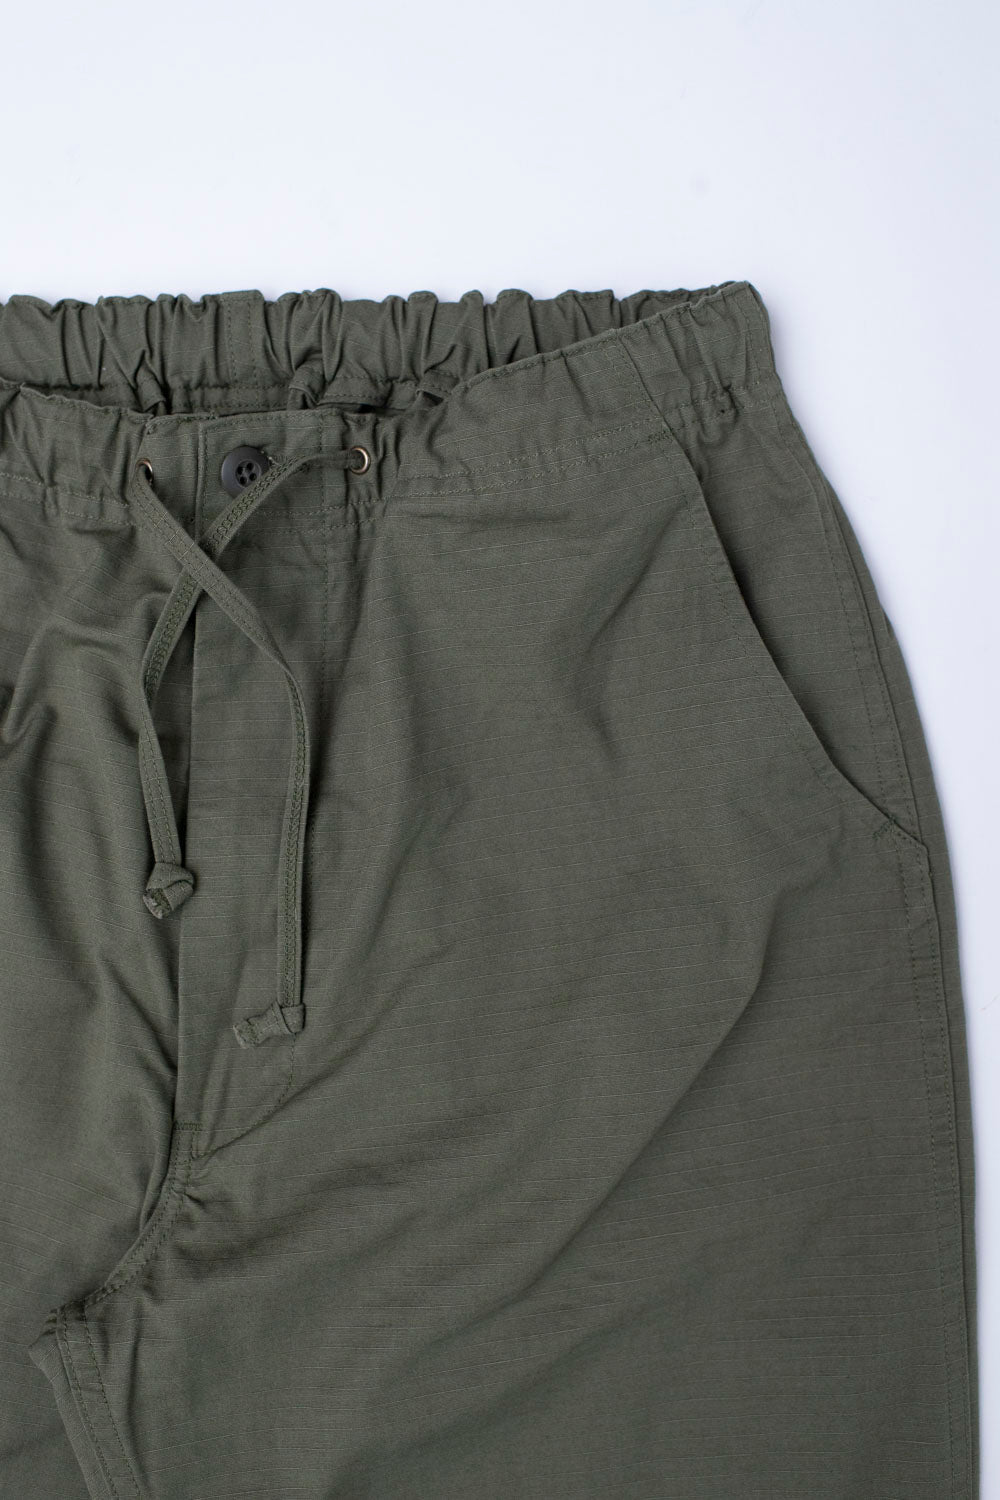 03-1002-76 - New Yorker Pant - Olive Ripstop